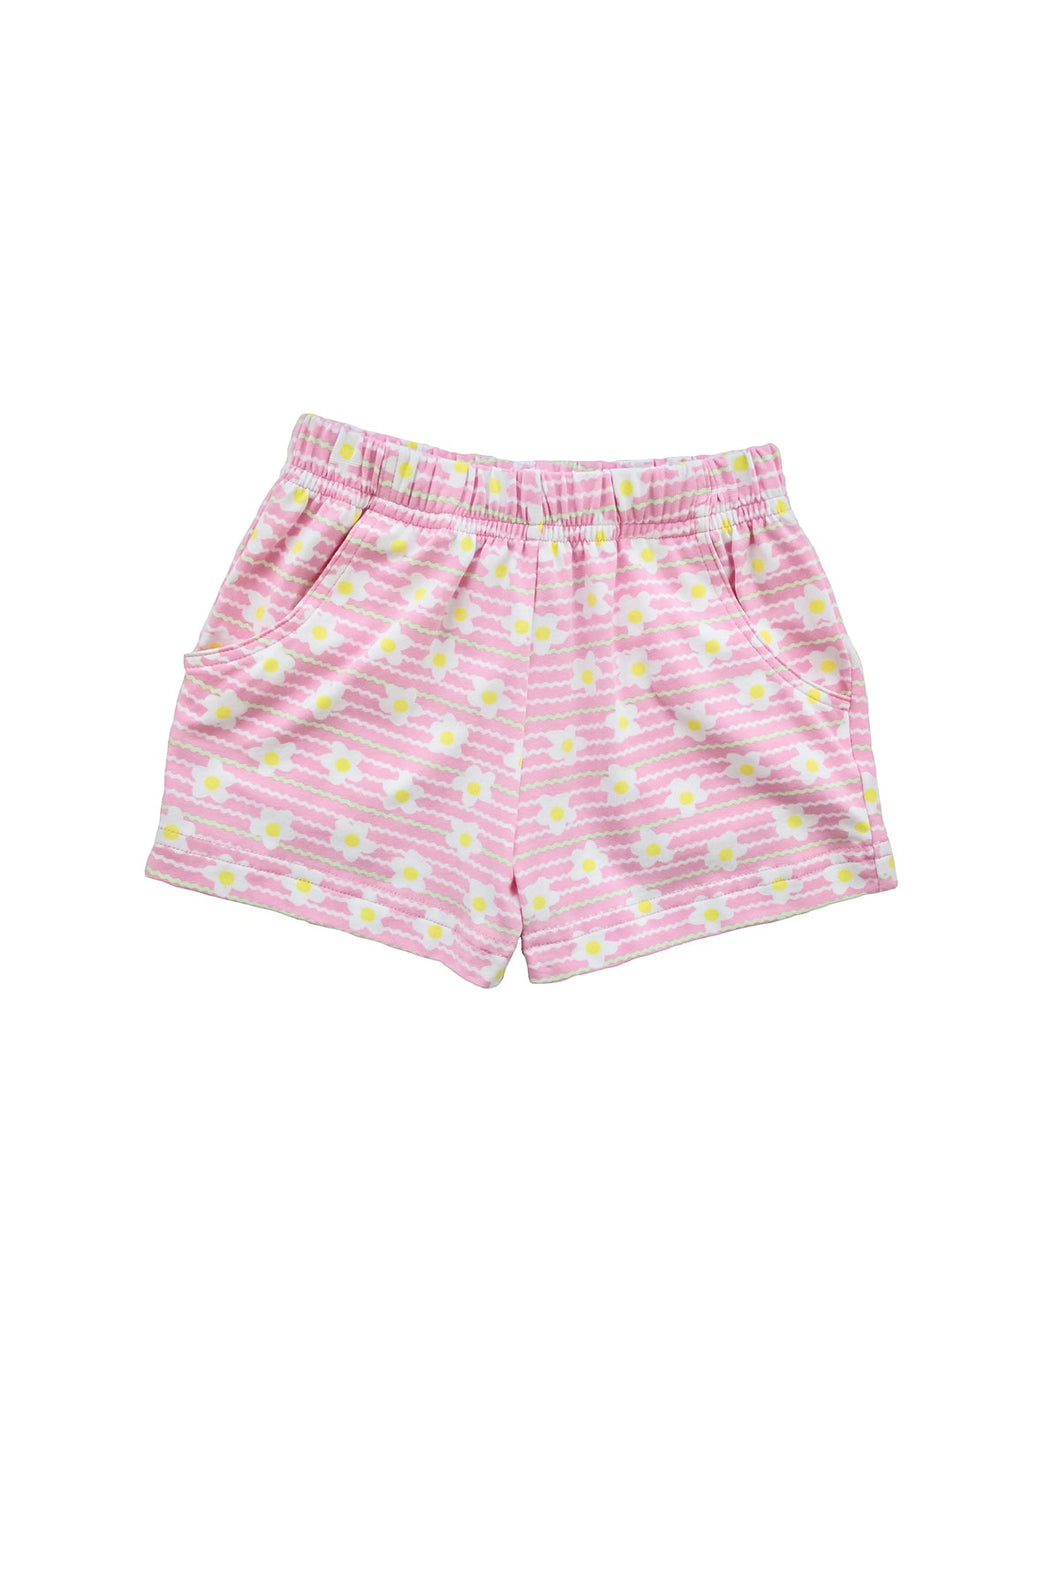 Pink Ric Rac Floral Print Pull On Shorts